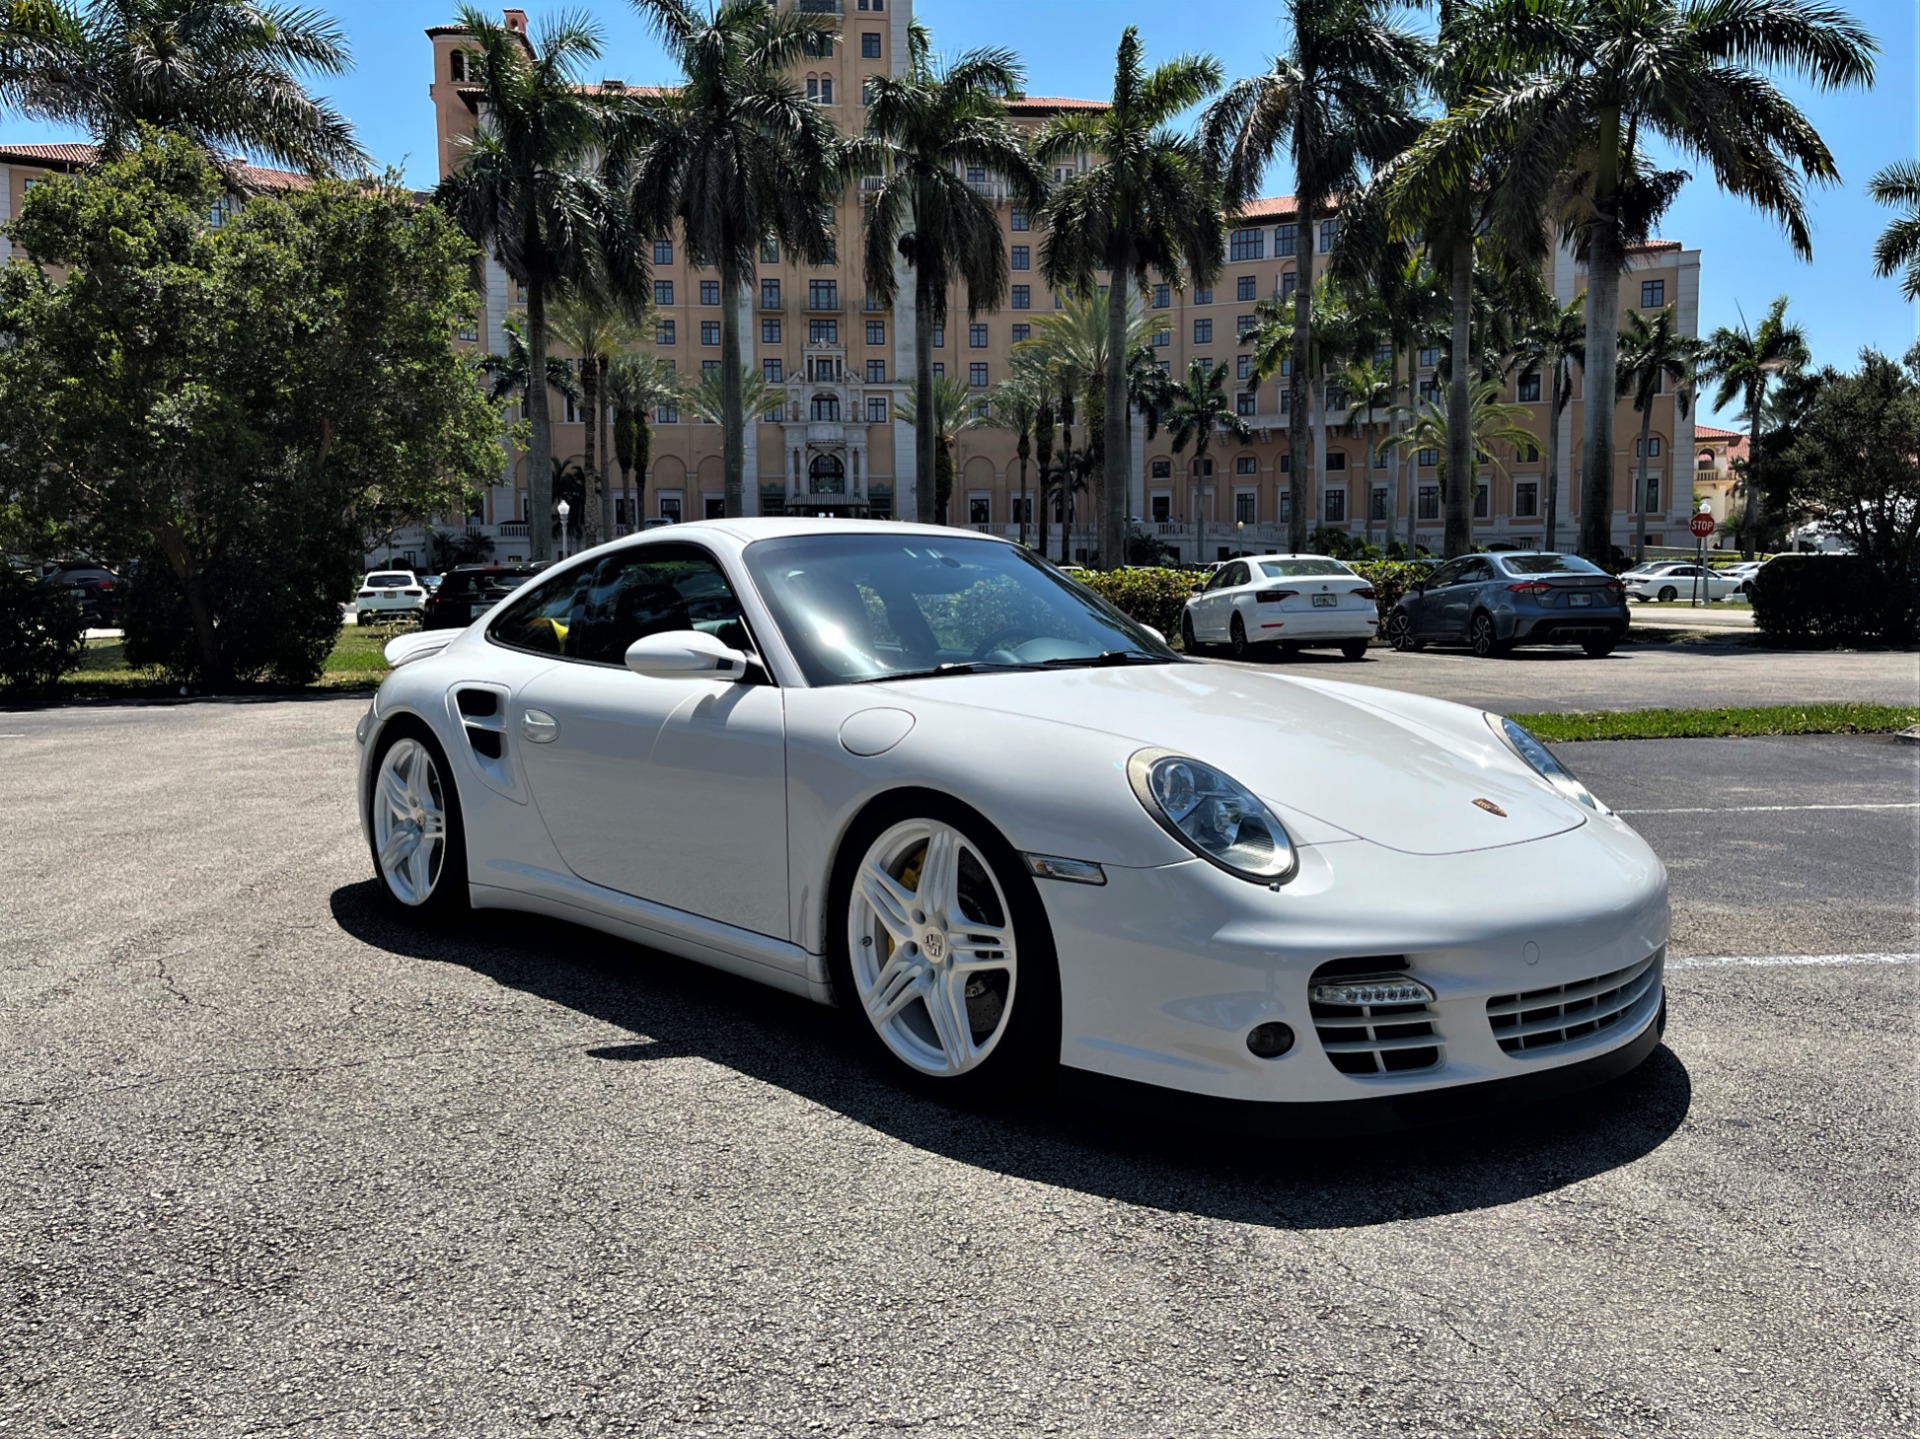 Used 2008 Porsche 911 Turbo for sale $124,850 at The Gables Sports Cars in Miami FL 33146 2